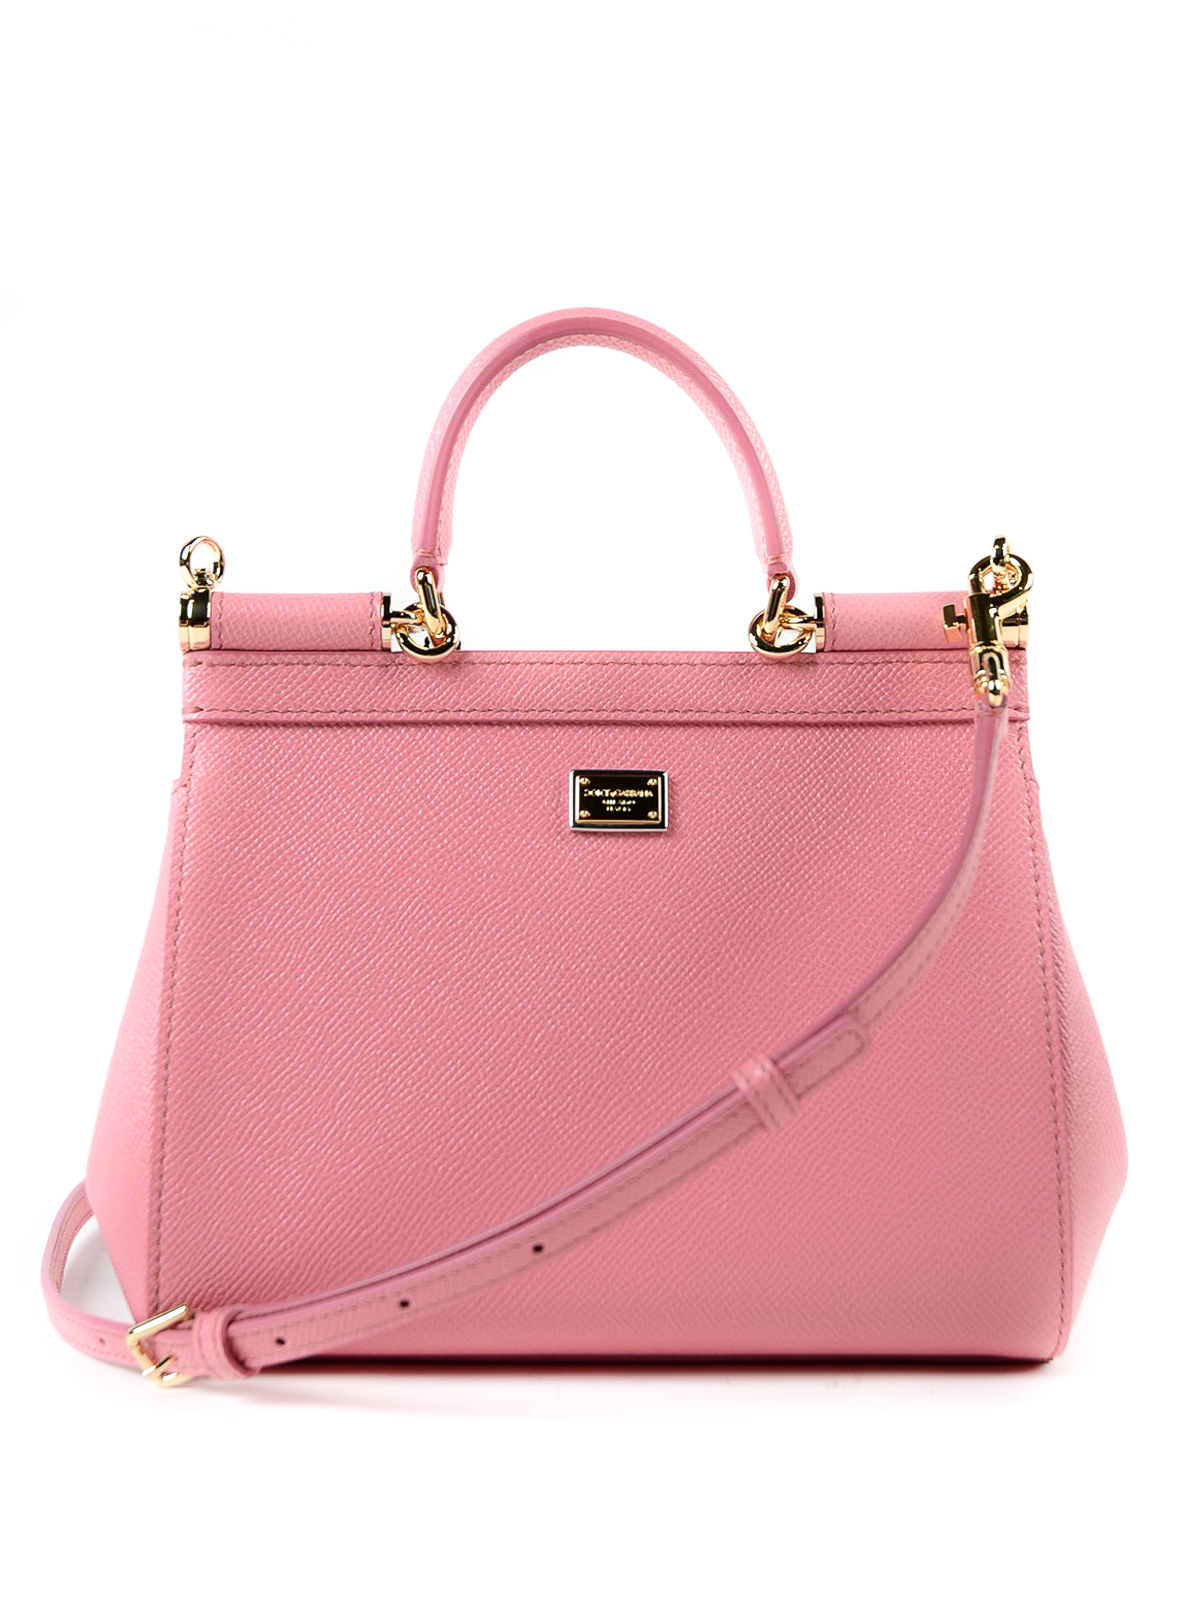 Cross body bags Dolce & Gabbana - Sicily Love small pink leather bag -  BB6003AS4998H401